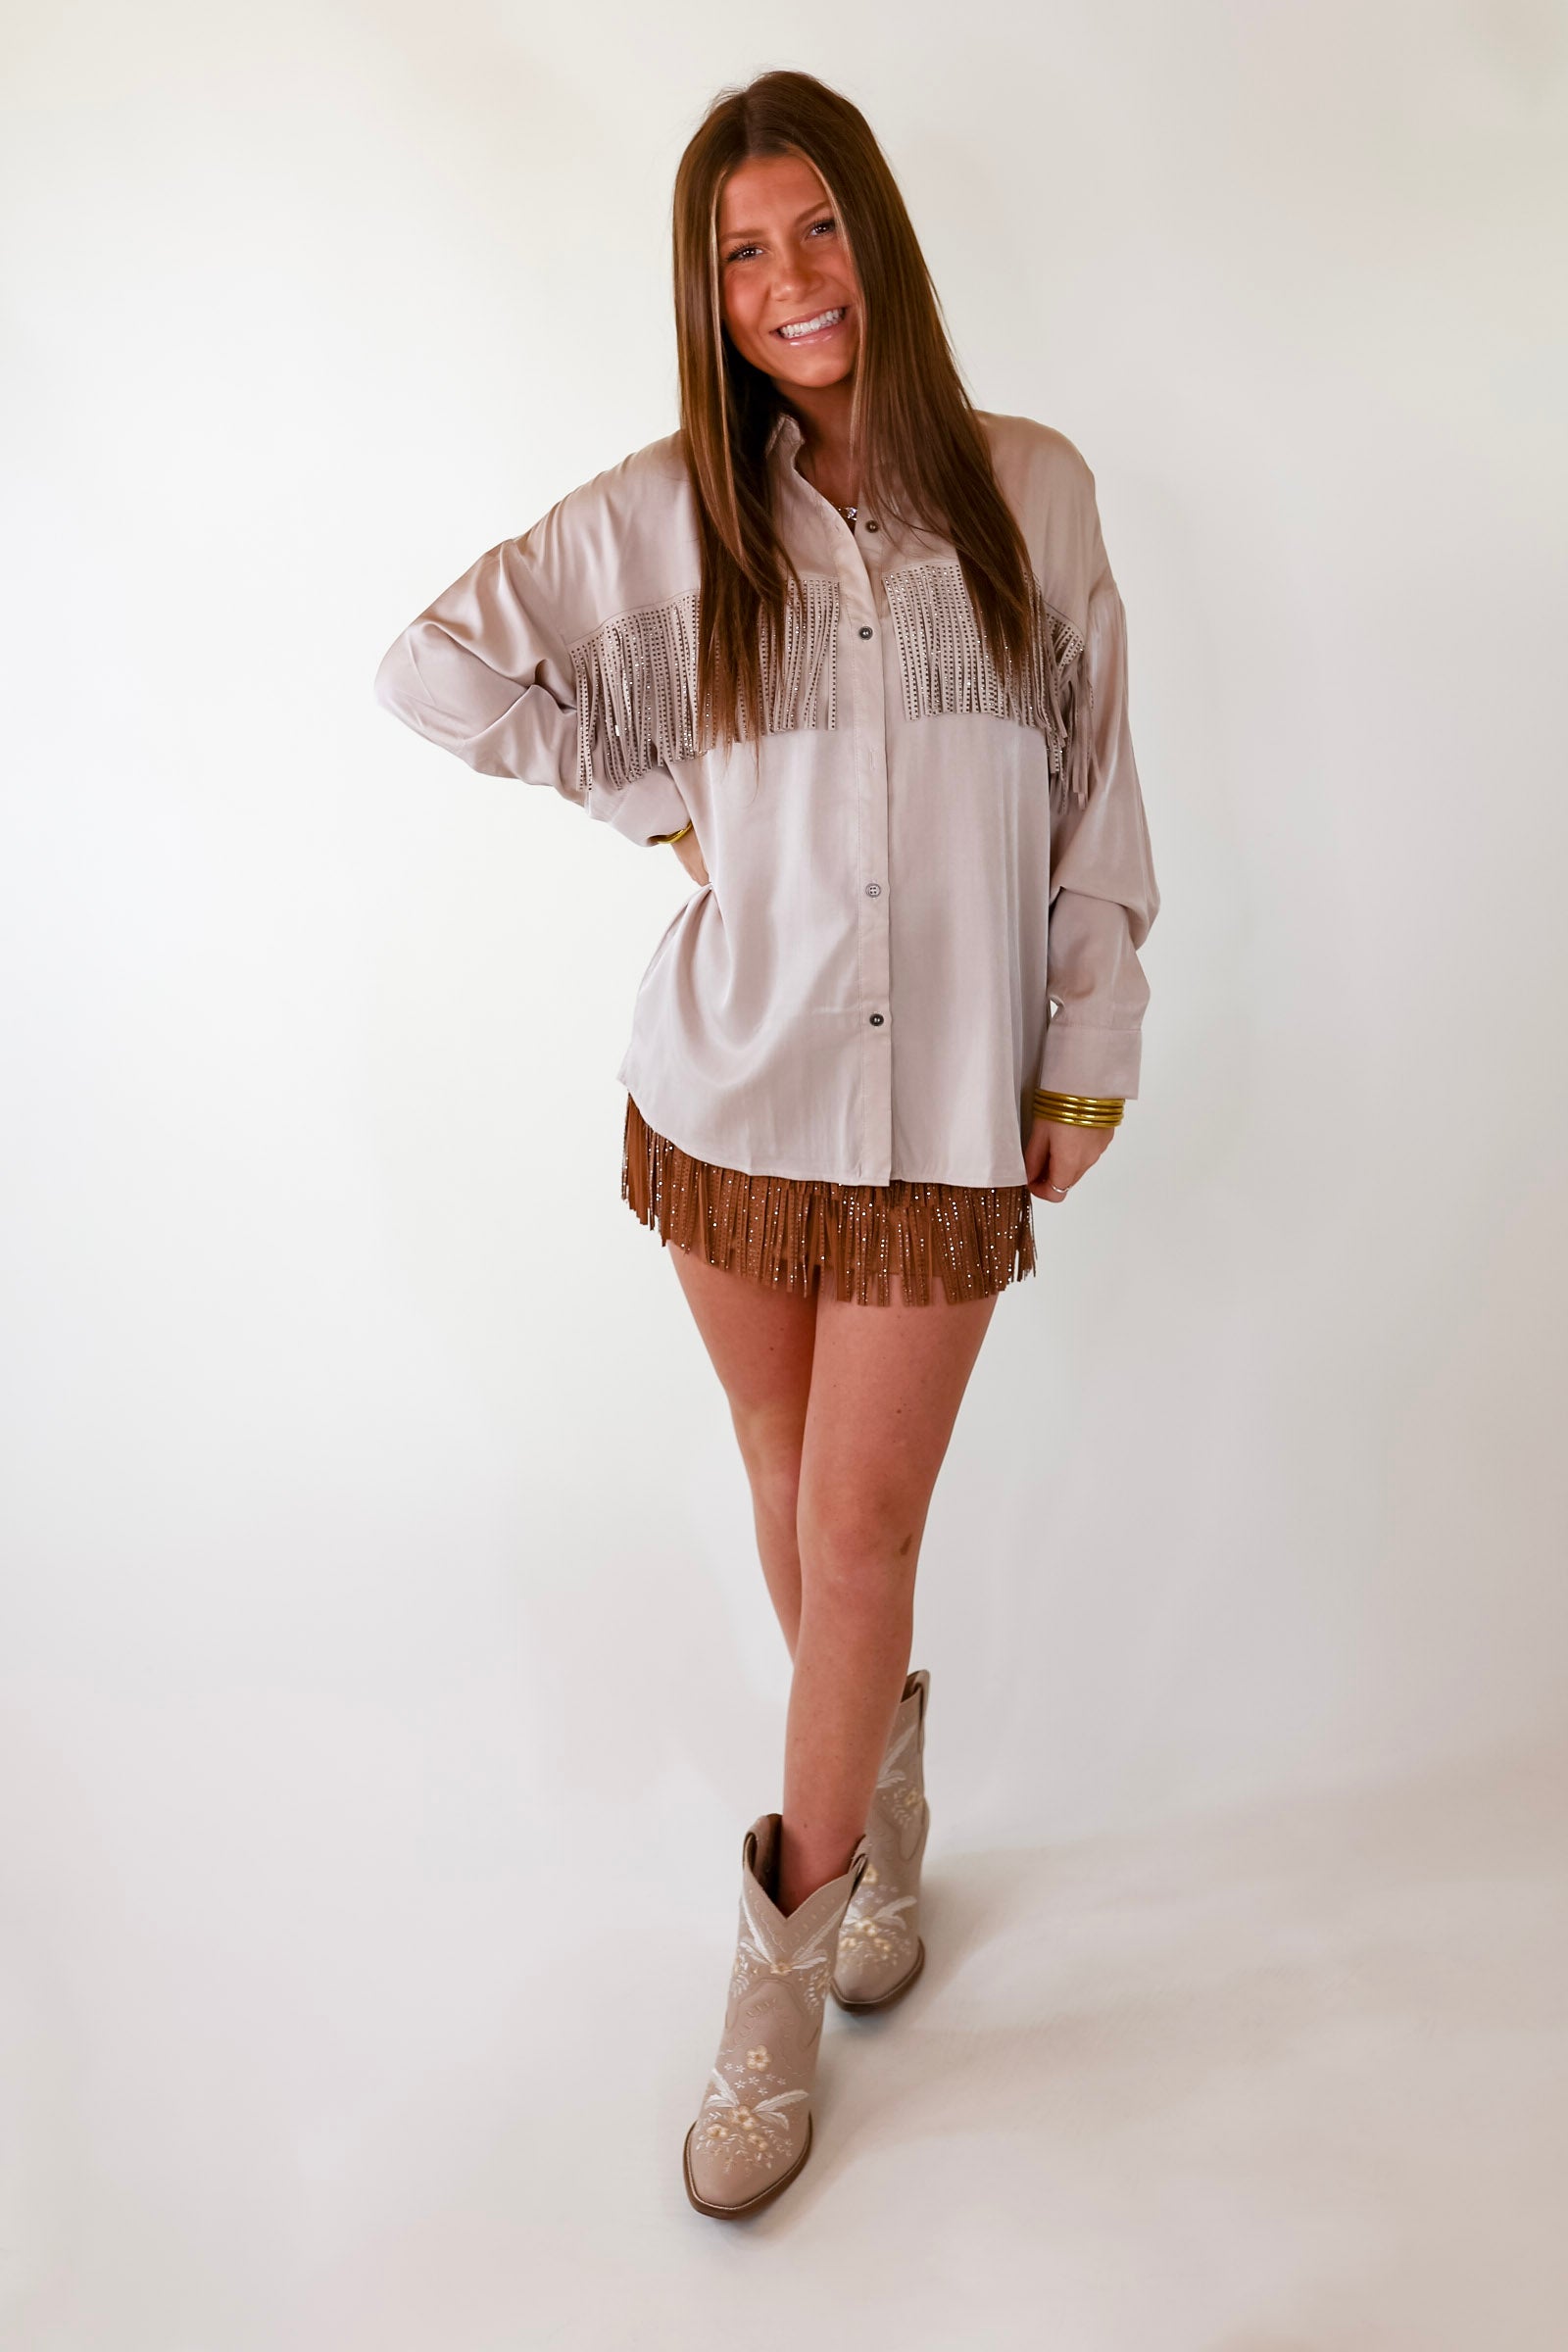 All That Shimmers Crystal Fringe Button Up Top with Long Sleeves in Champagne - Giddy Up Glamour Boutique